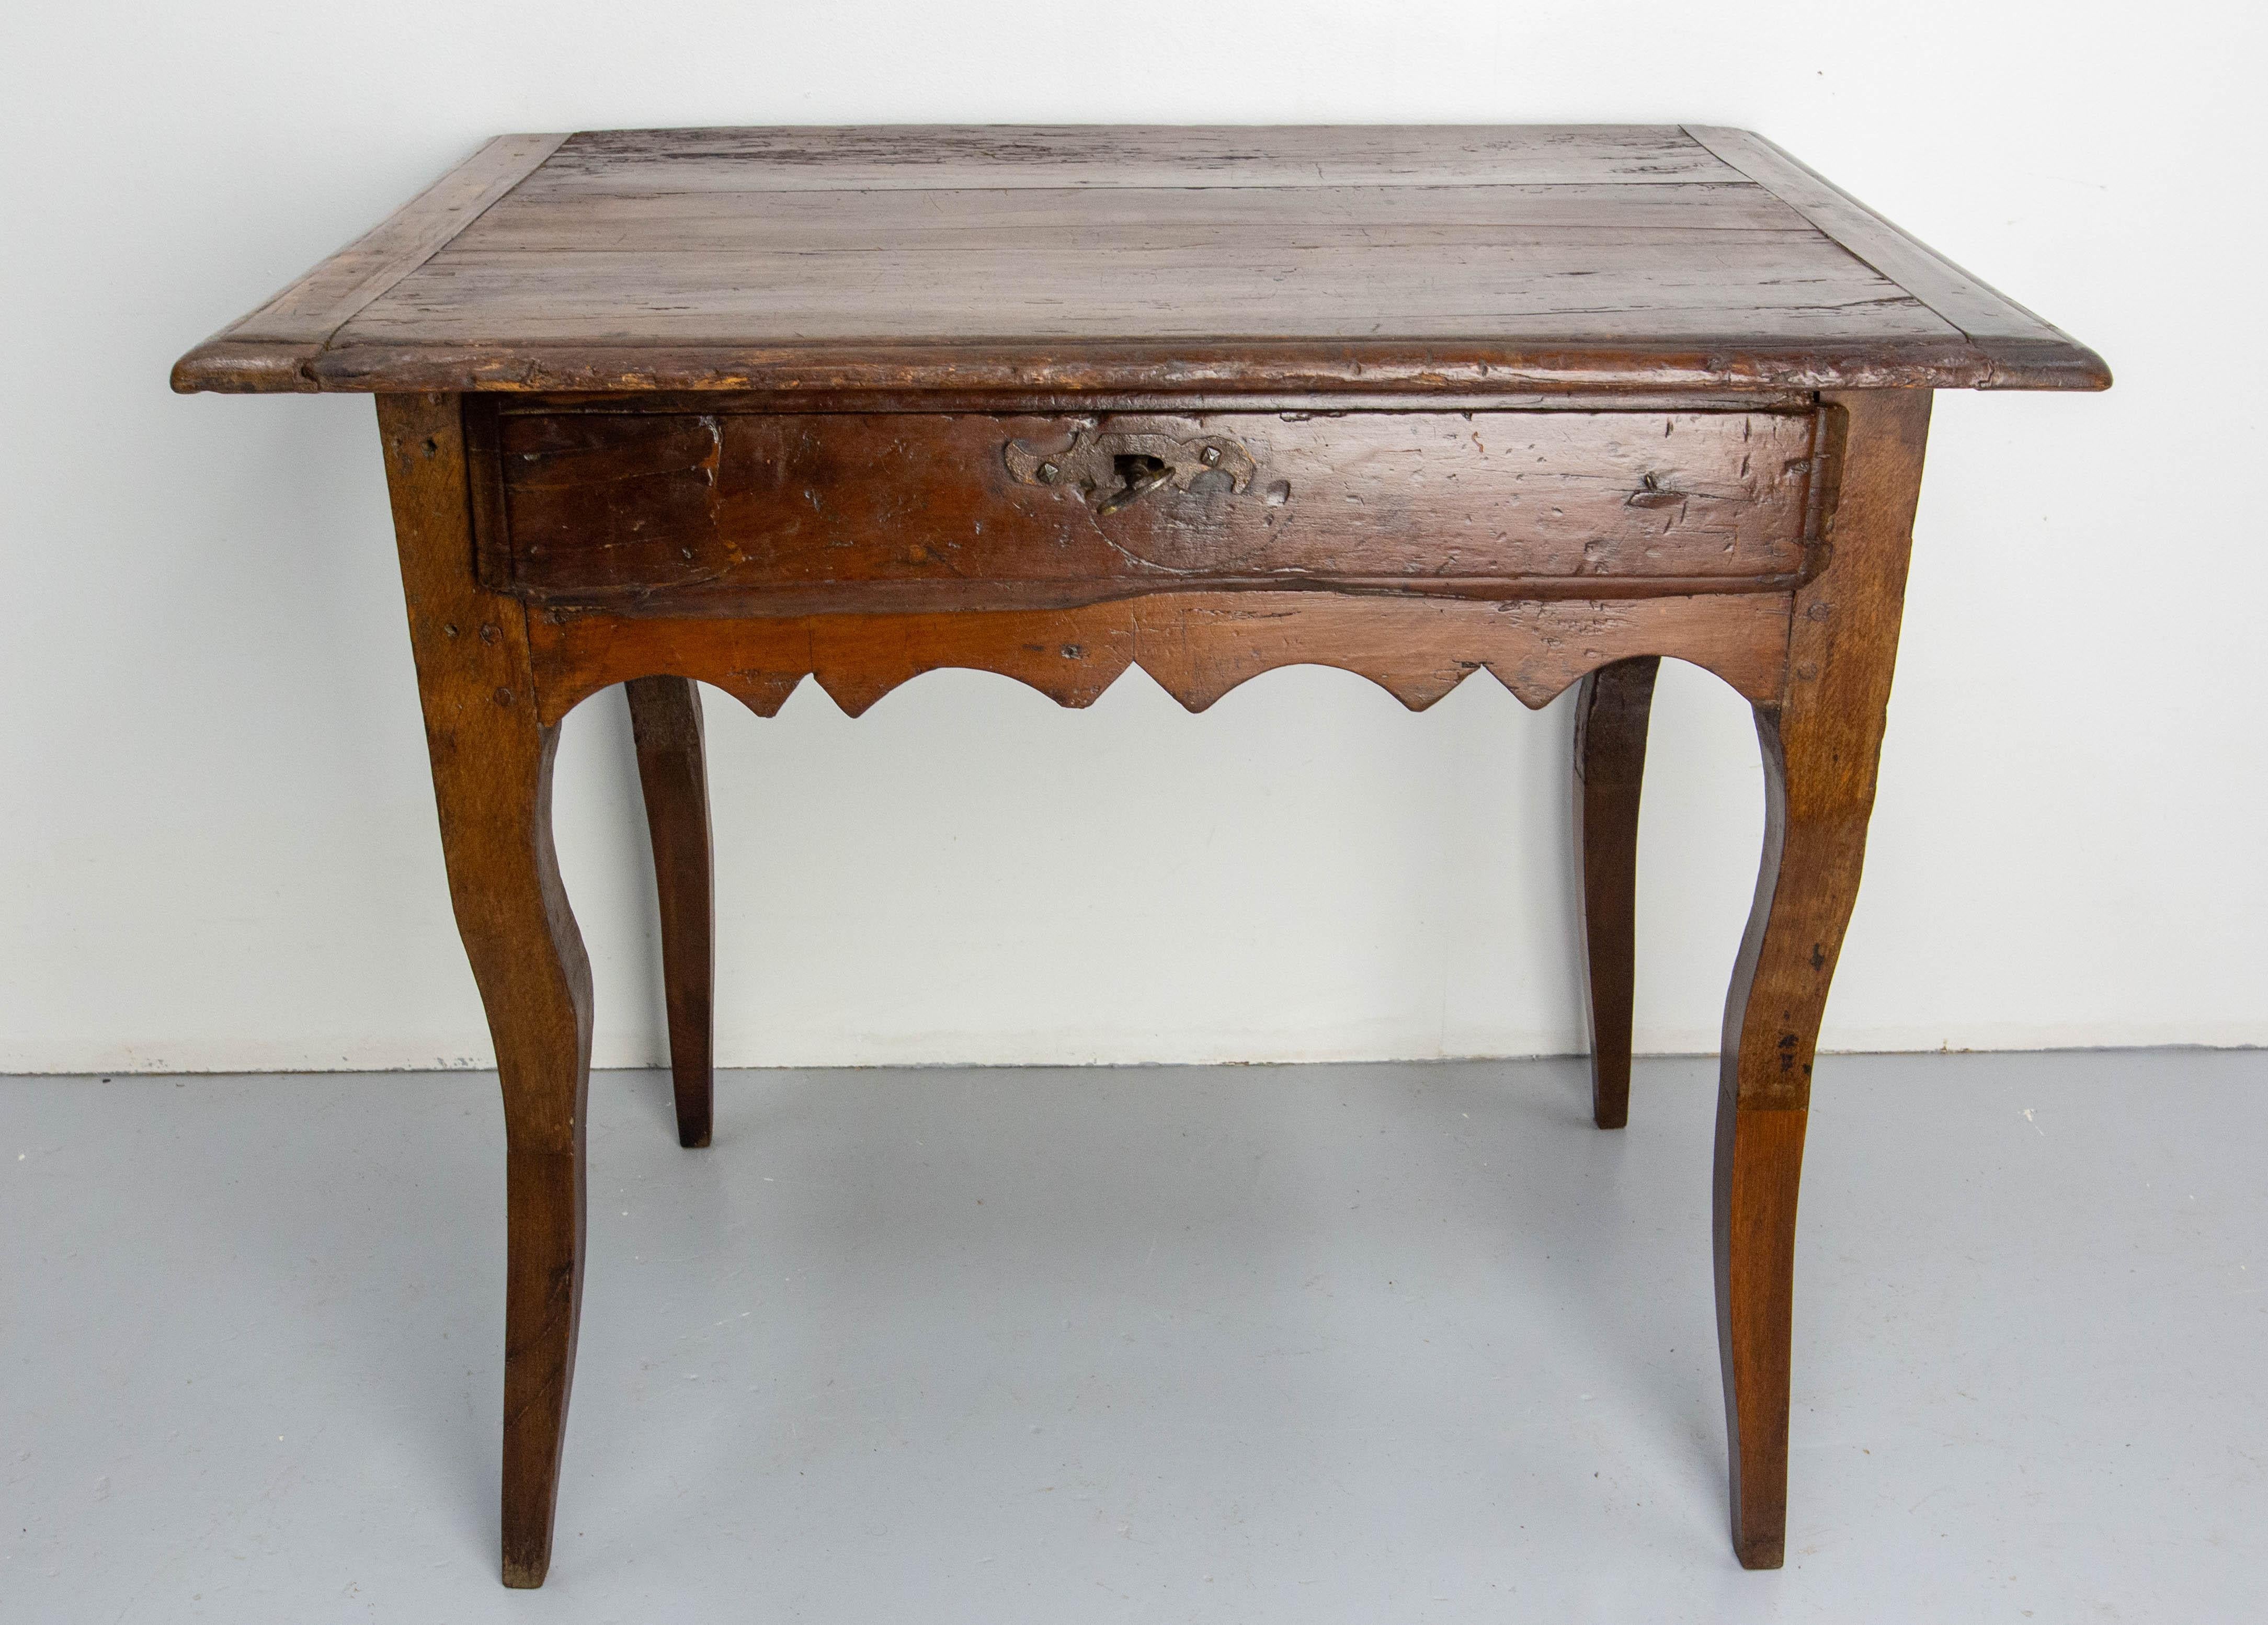 Writing table or desk made of poplar in the french 18th century, Louis XV period.
Height between the roof and the belt 20.87 in. (53 cm).
Totally authentic, this piece of furniture was made in the 18th century, in a small provincial workshop. This